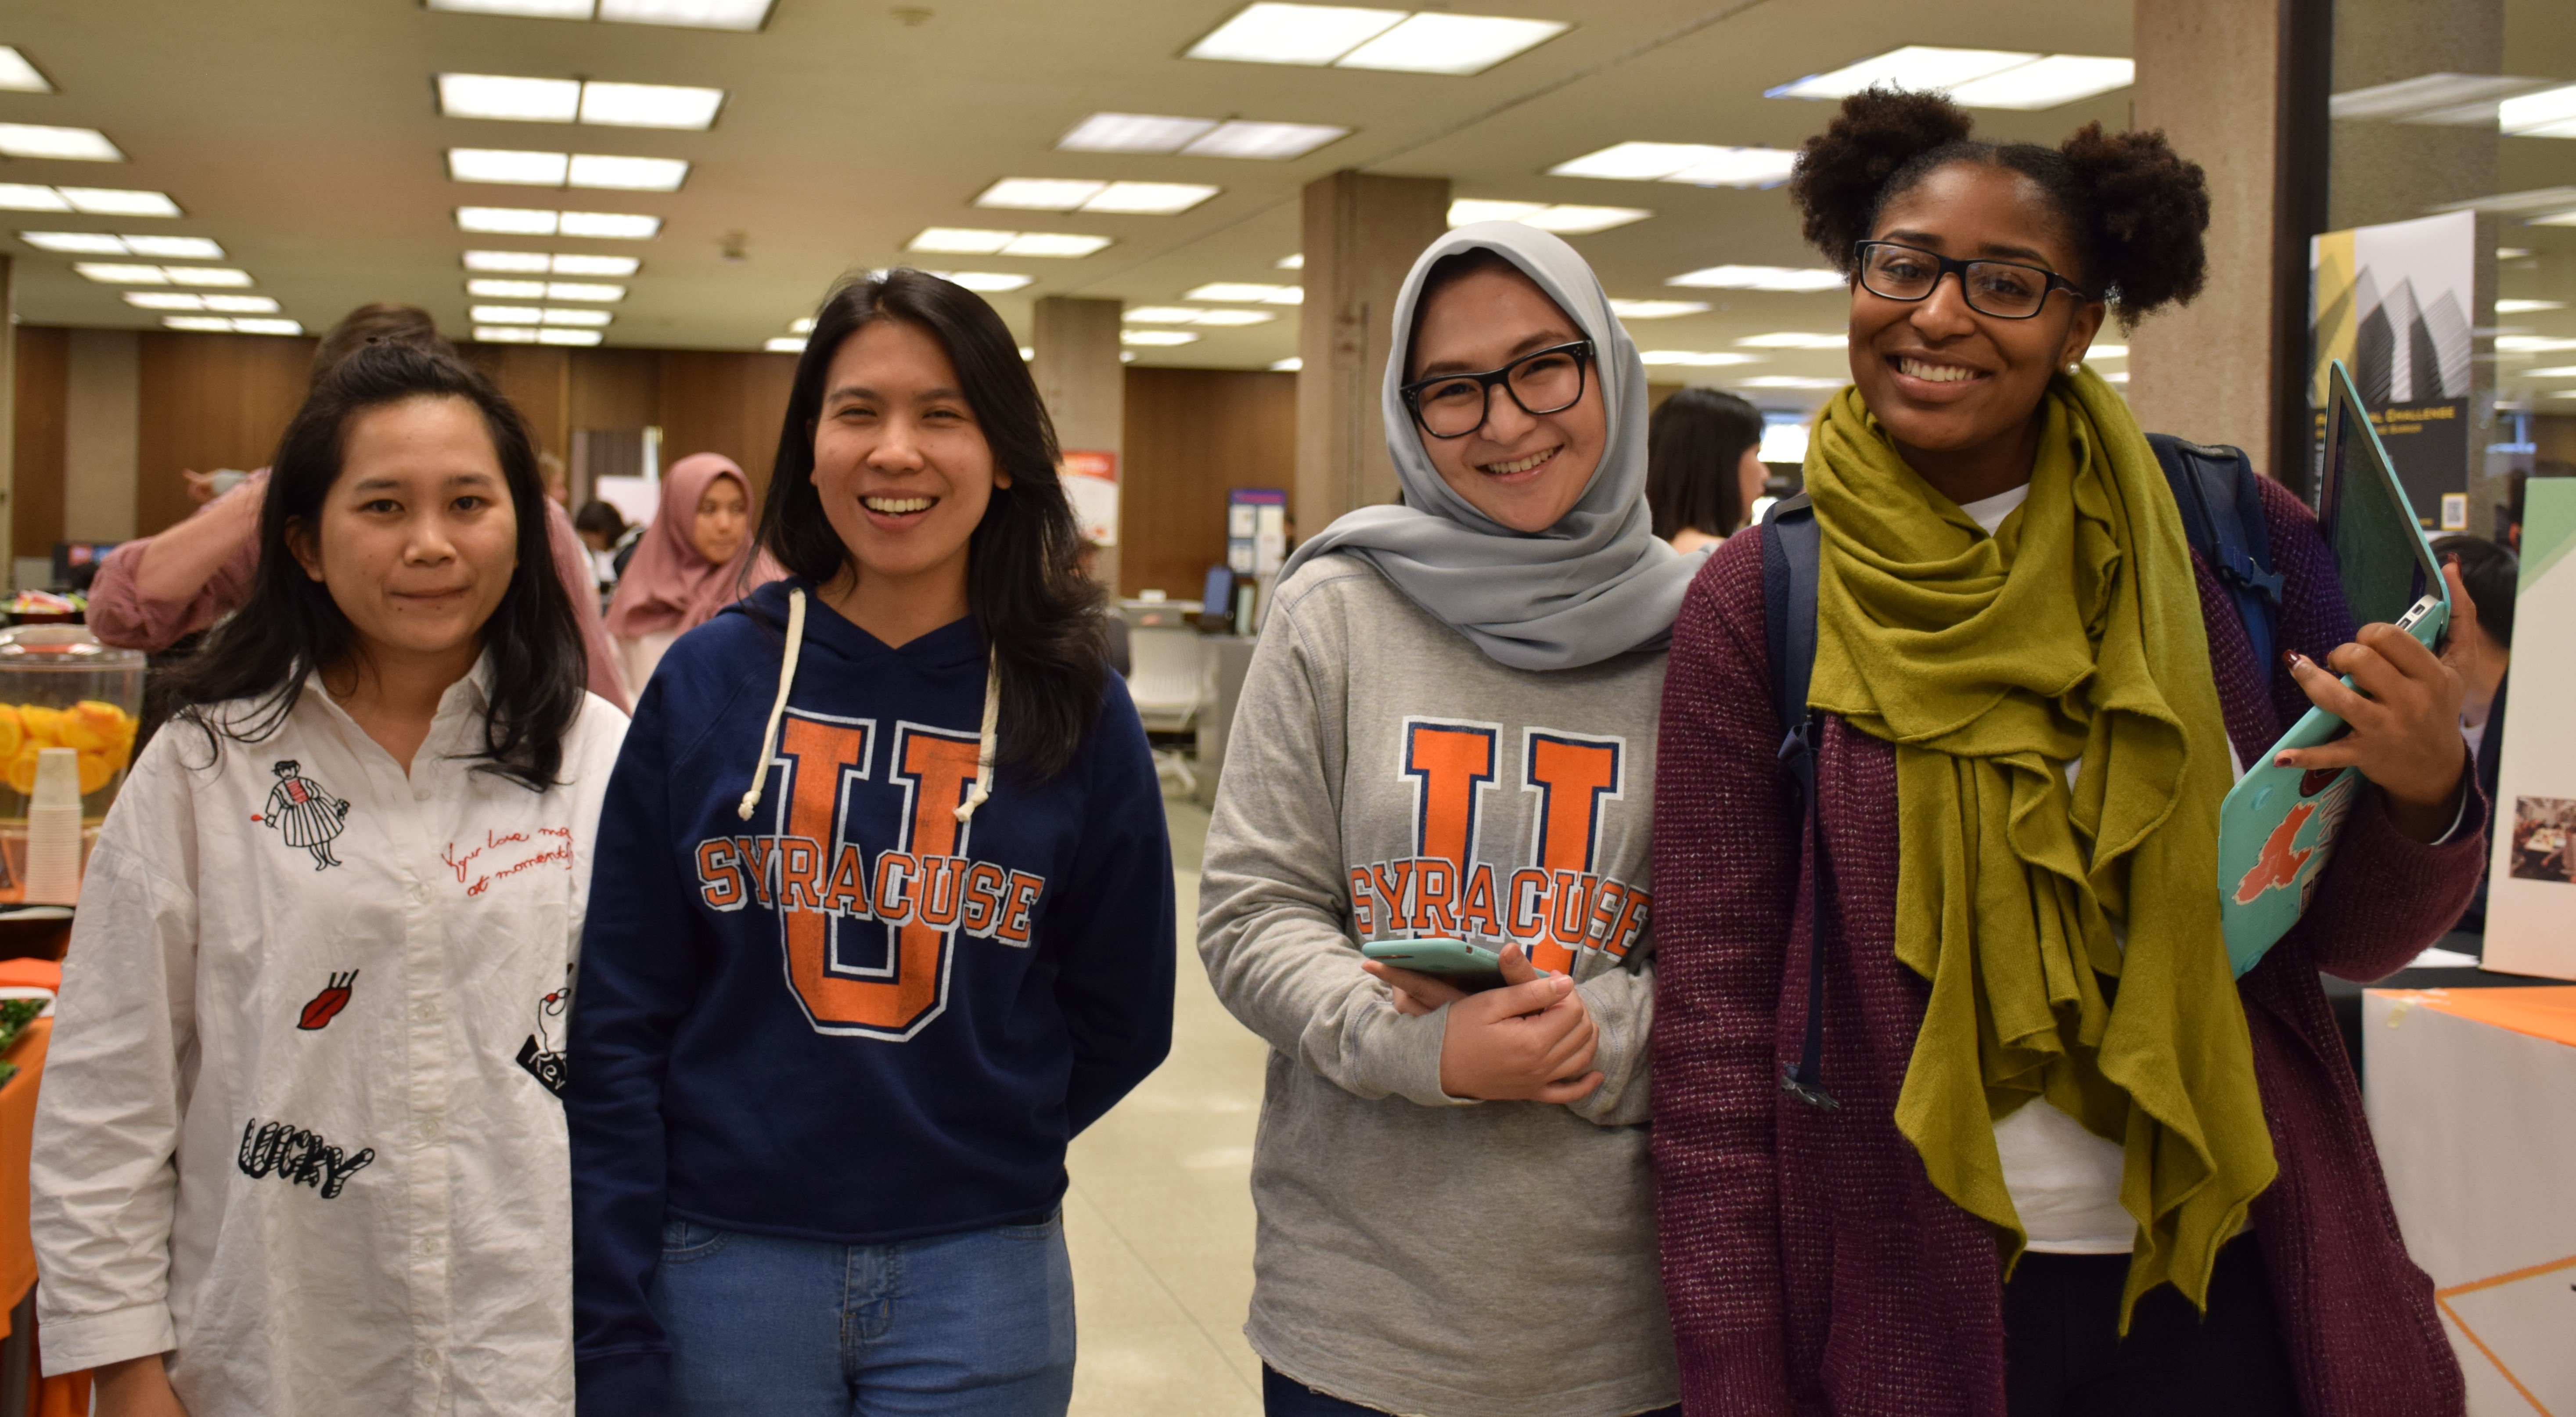 students at an event at SU Libraries